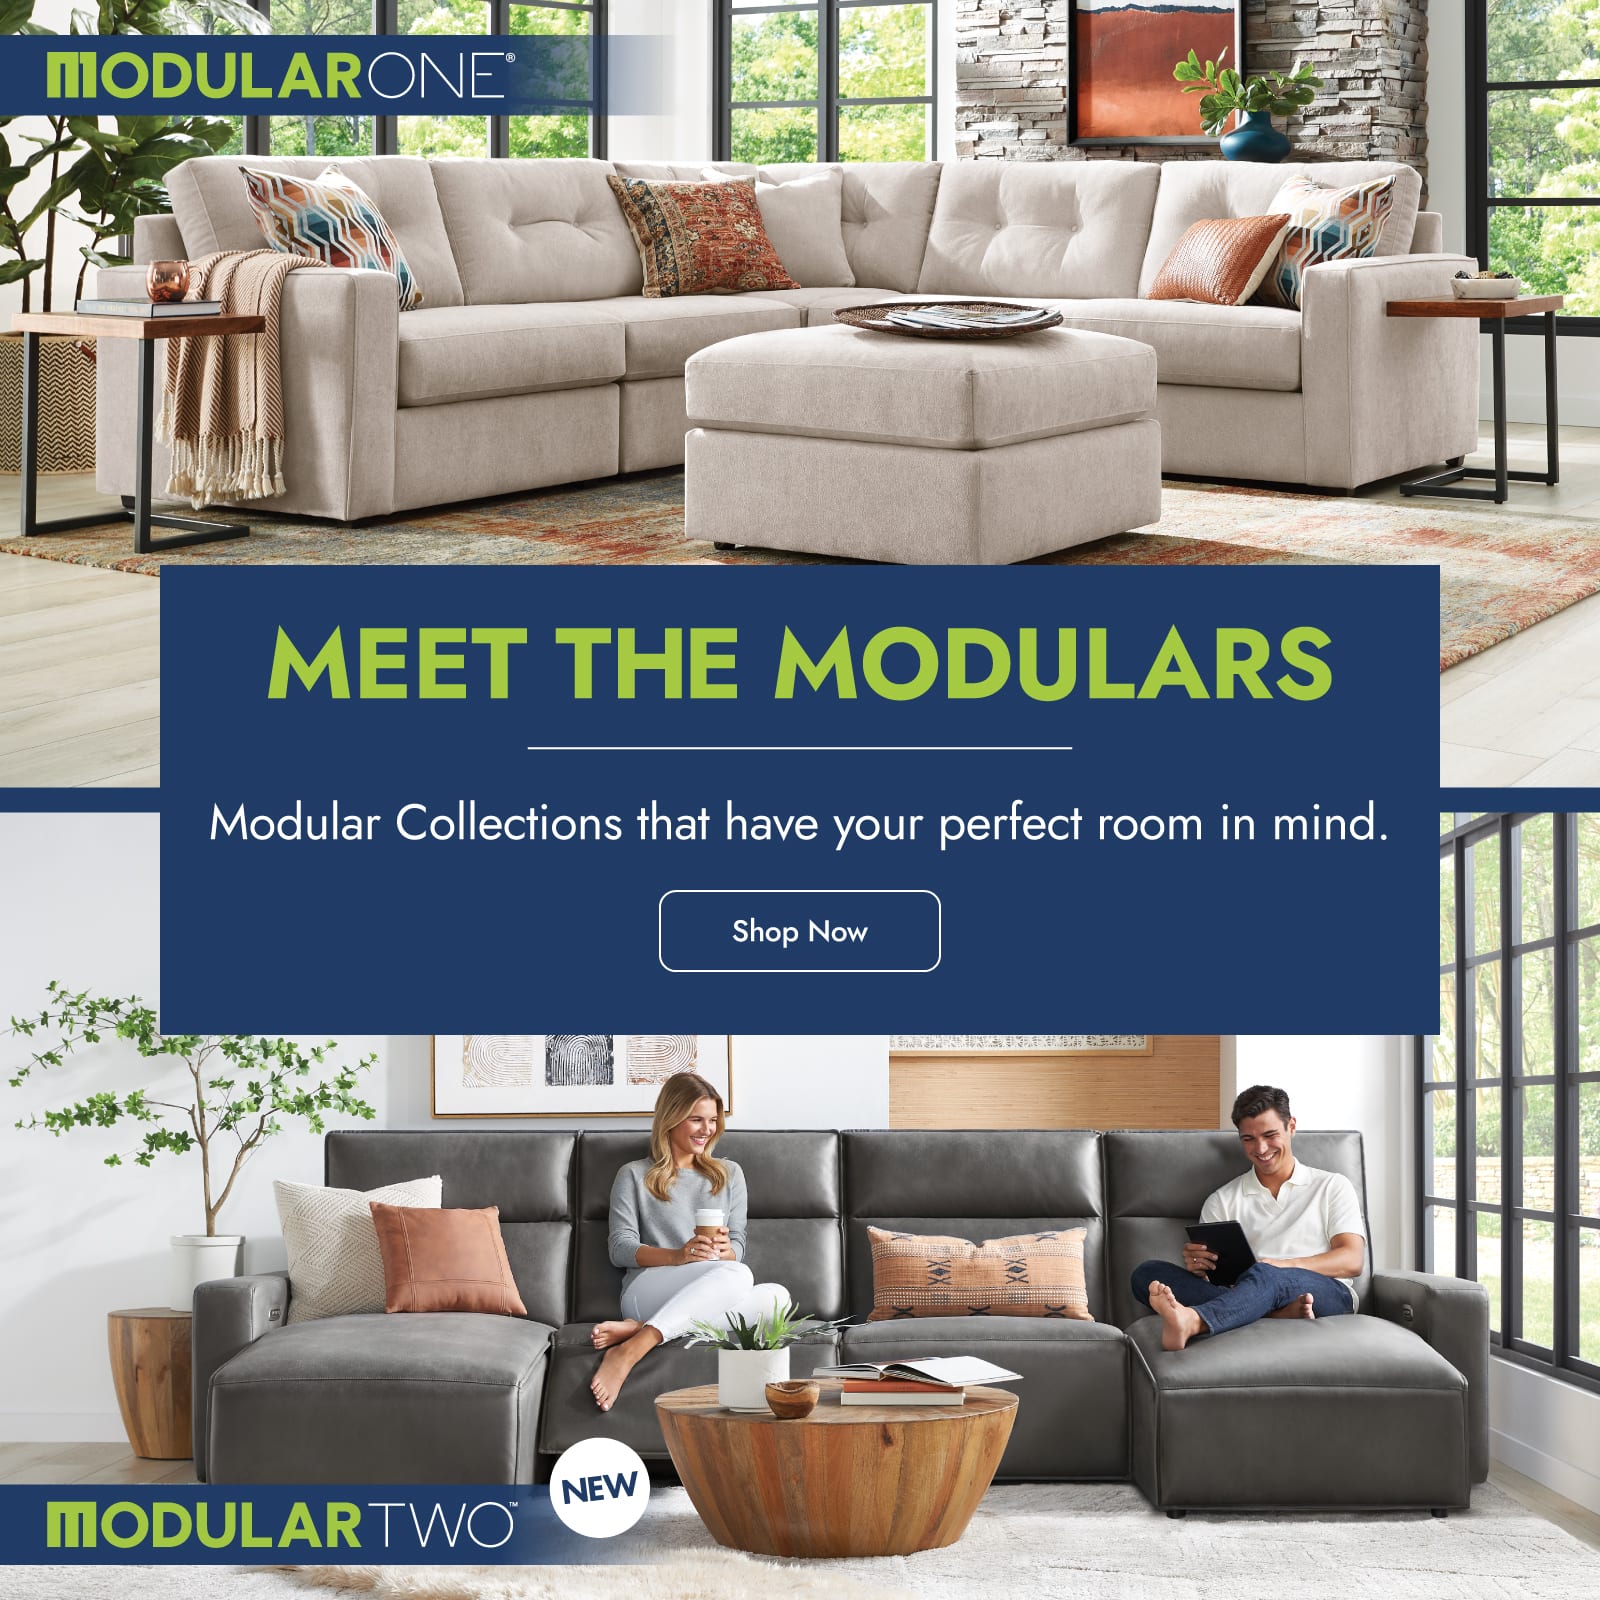 Meet the Modulars - ModularOne and ModularTwo collections that have your perfect room in mind.